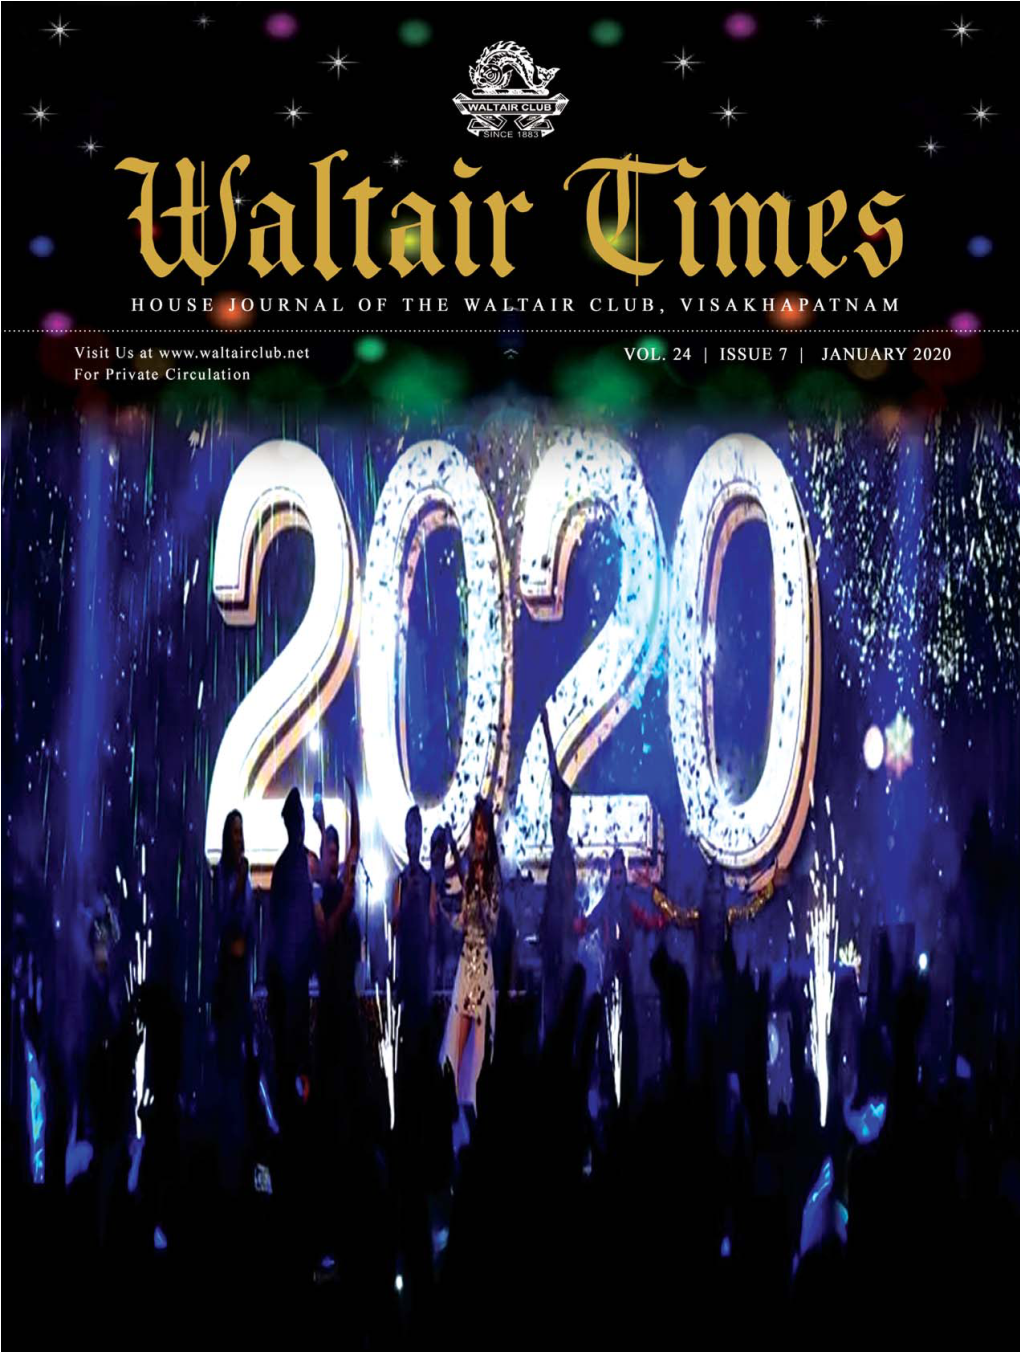 How to Advertise in Waltair Times